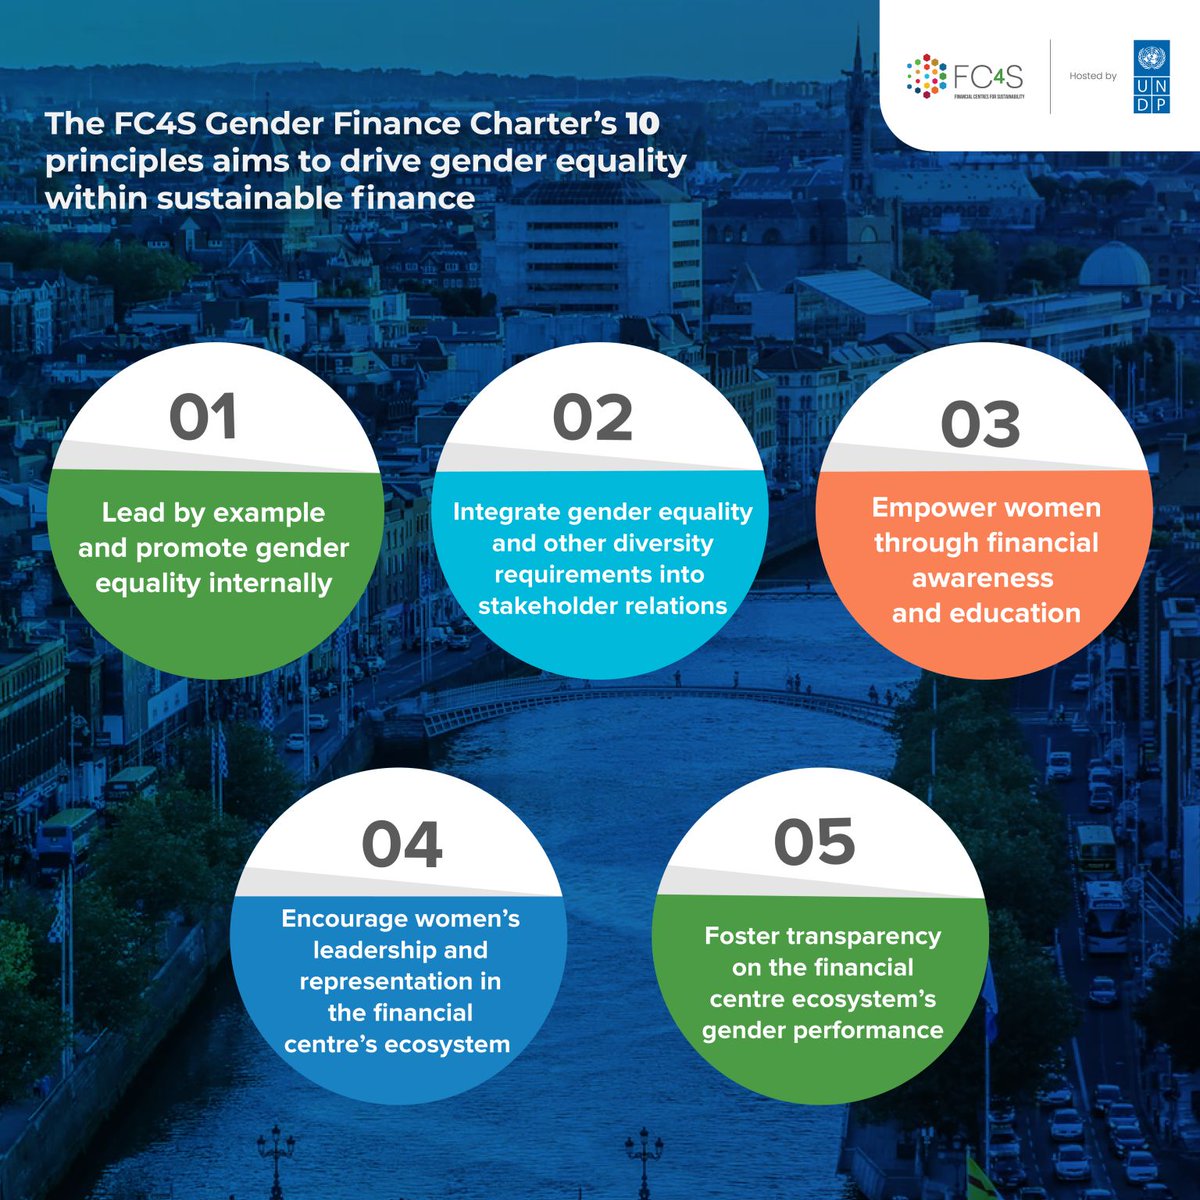 🙌 With the endorsement of 2️⃣ 1️⃣ financial centres, the #FC4SGenderFinanceCharter aims to advance #GenderEquality in #SustainableFinance. Here are first 5️⃣ of its 🔟 core principles. #FC4S #GenderFinance #CSW68 #InvestInWomen 🔍 Learn more 🔗 bit.ly/49xRDmK